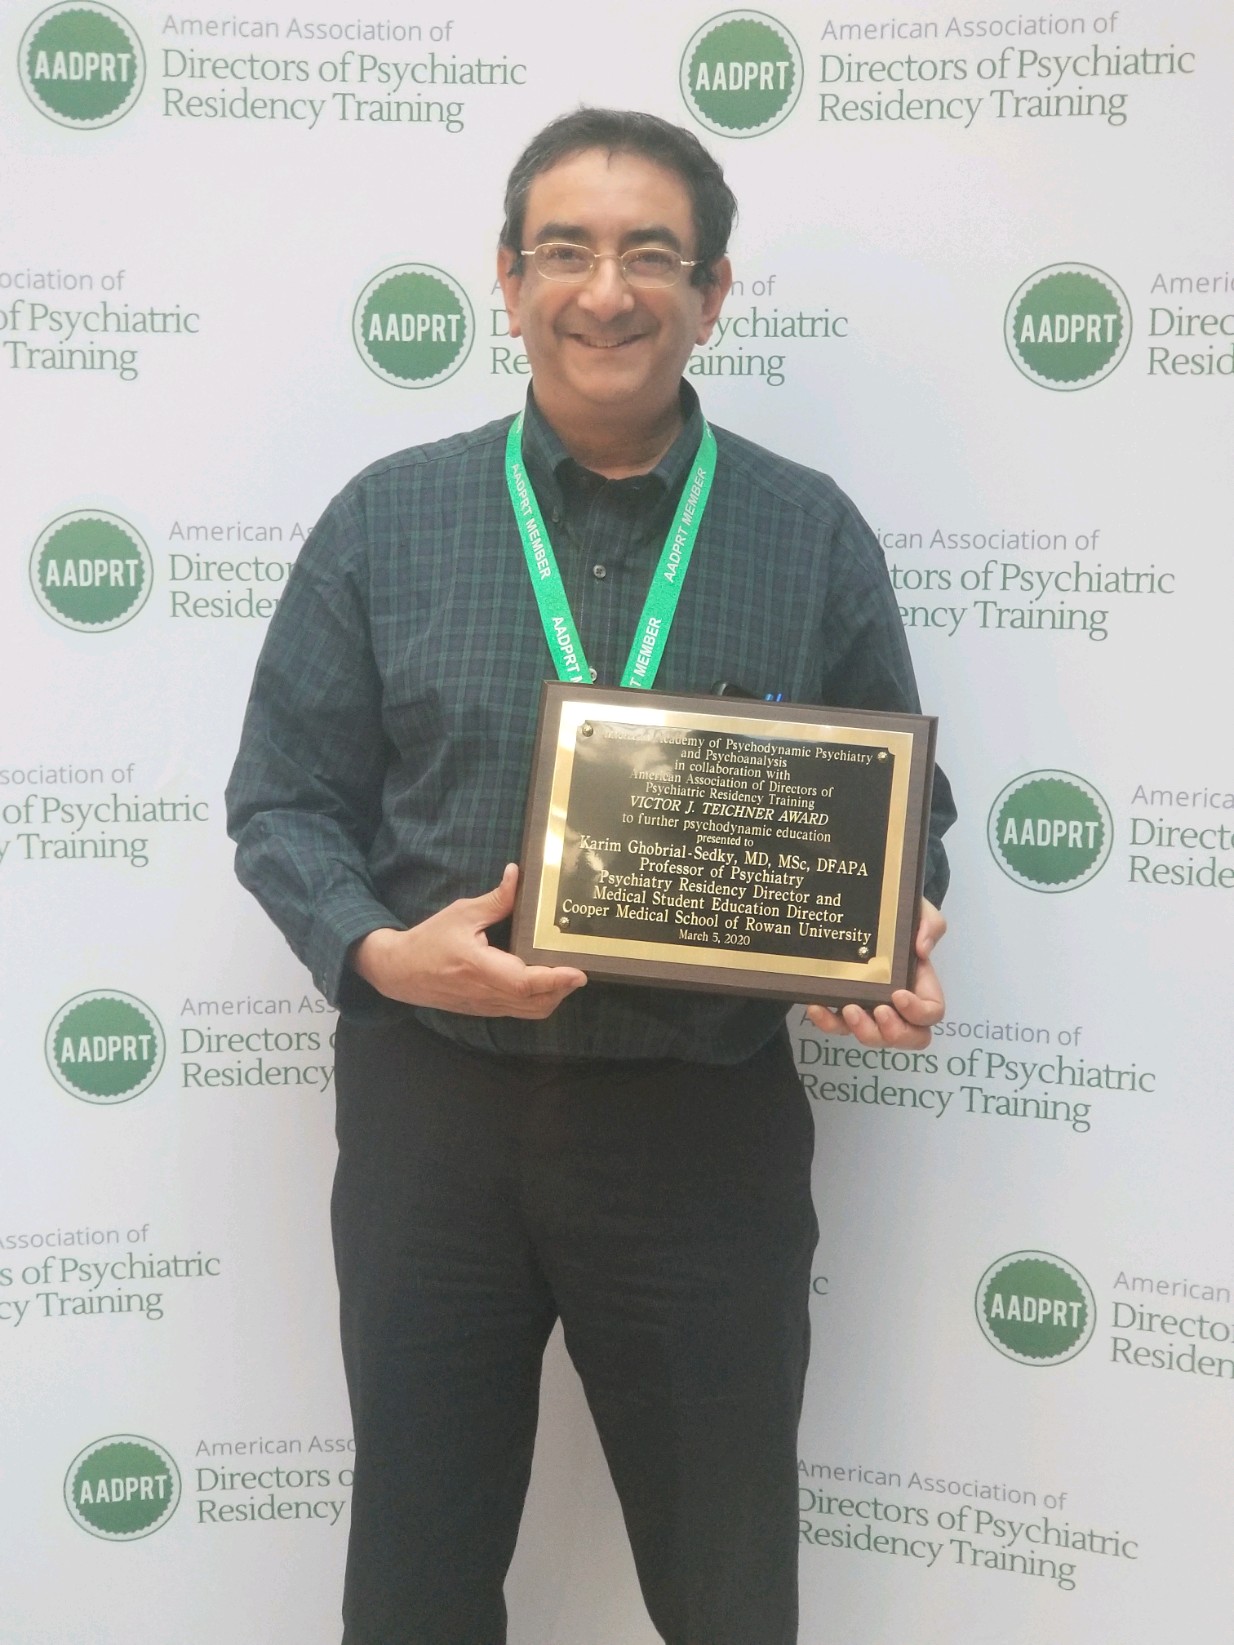 Dr. Sedky poses with award